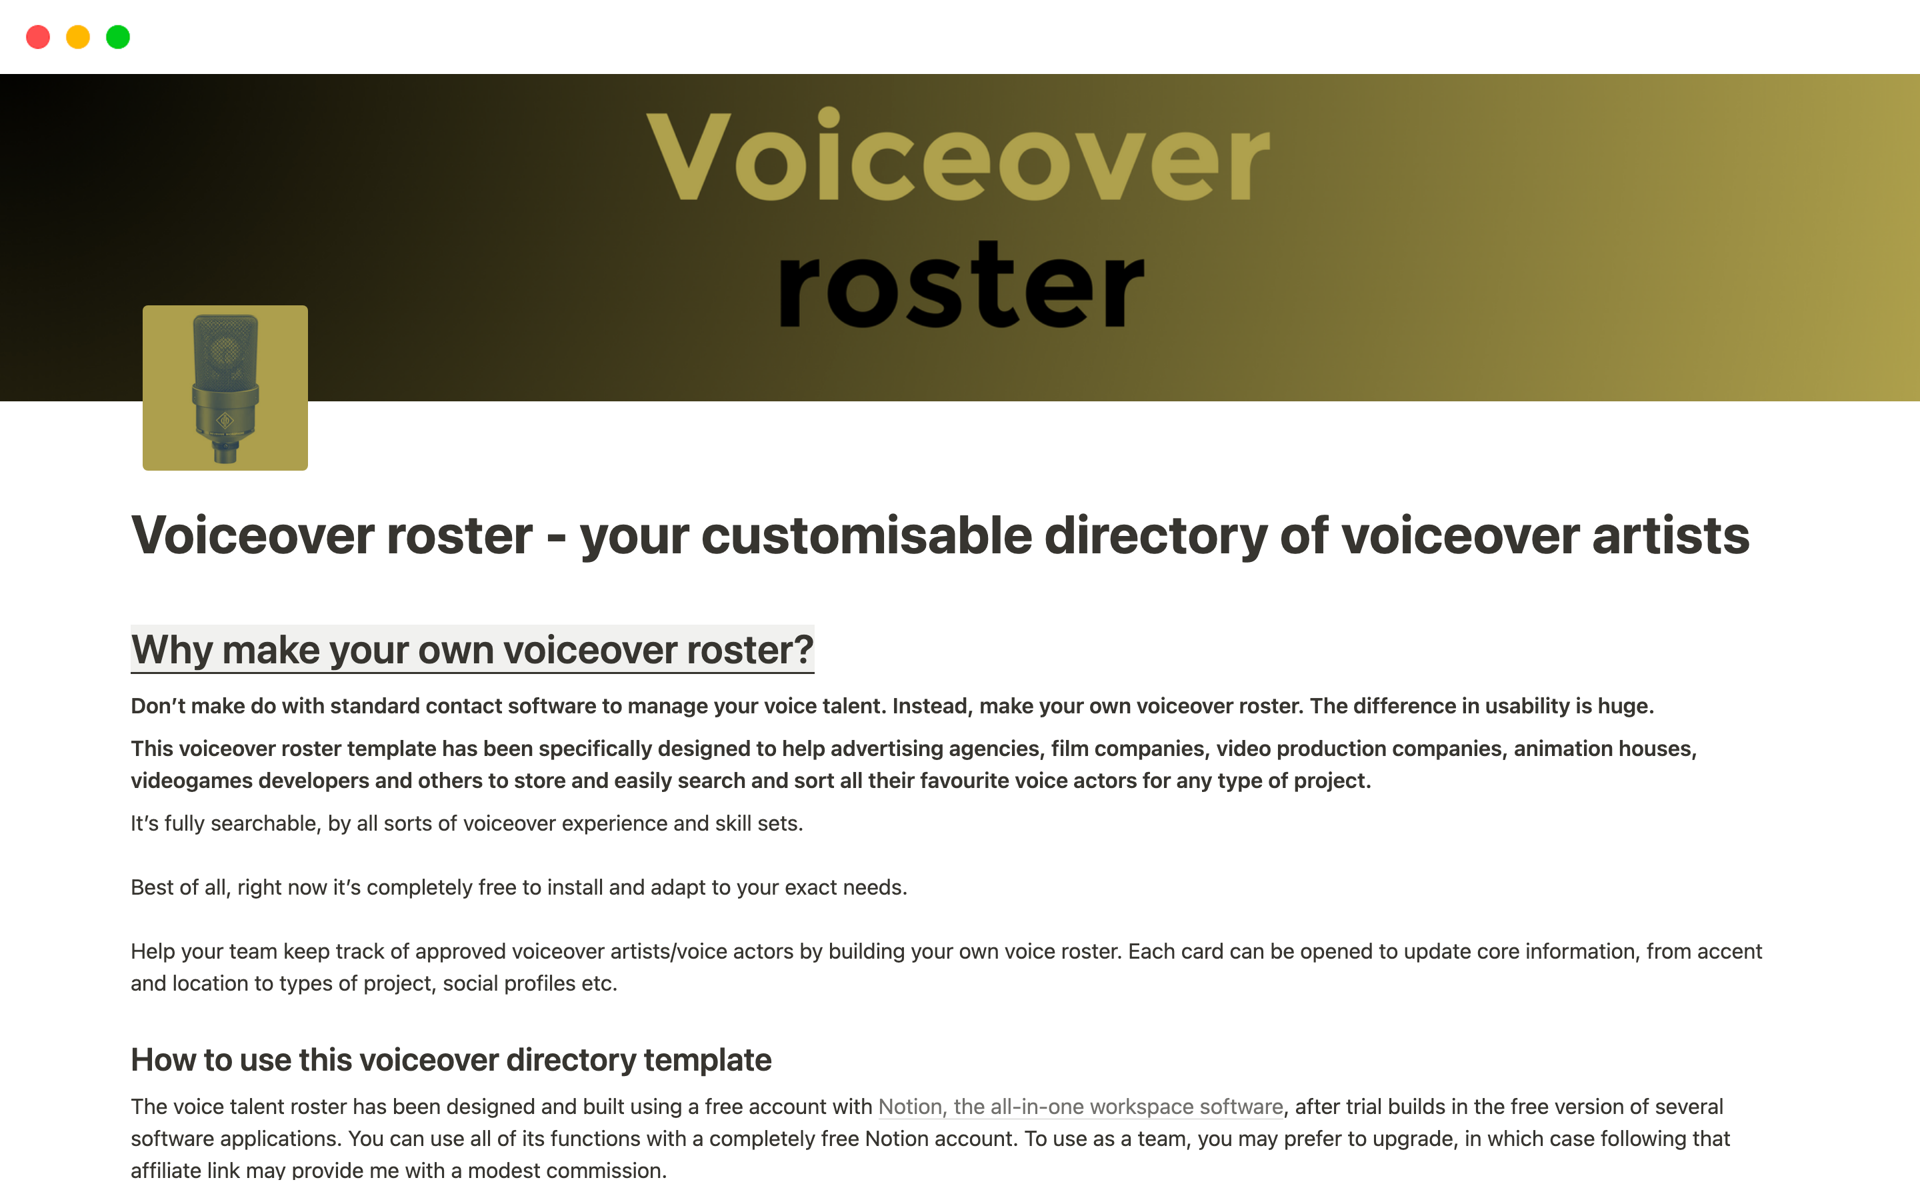 Voiceover roster - a voice artist directoryのテンプレートのプレビュー